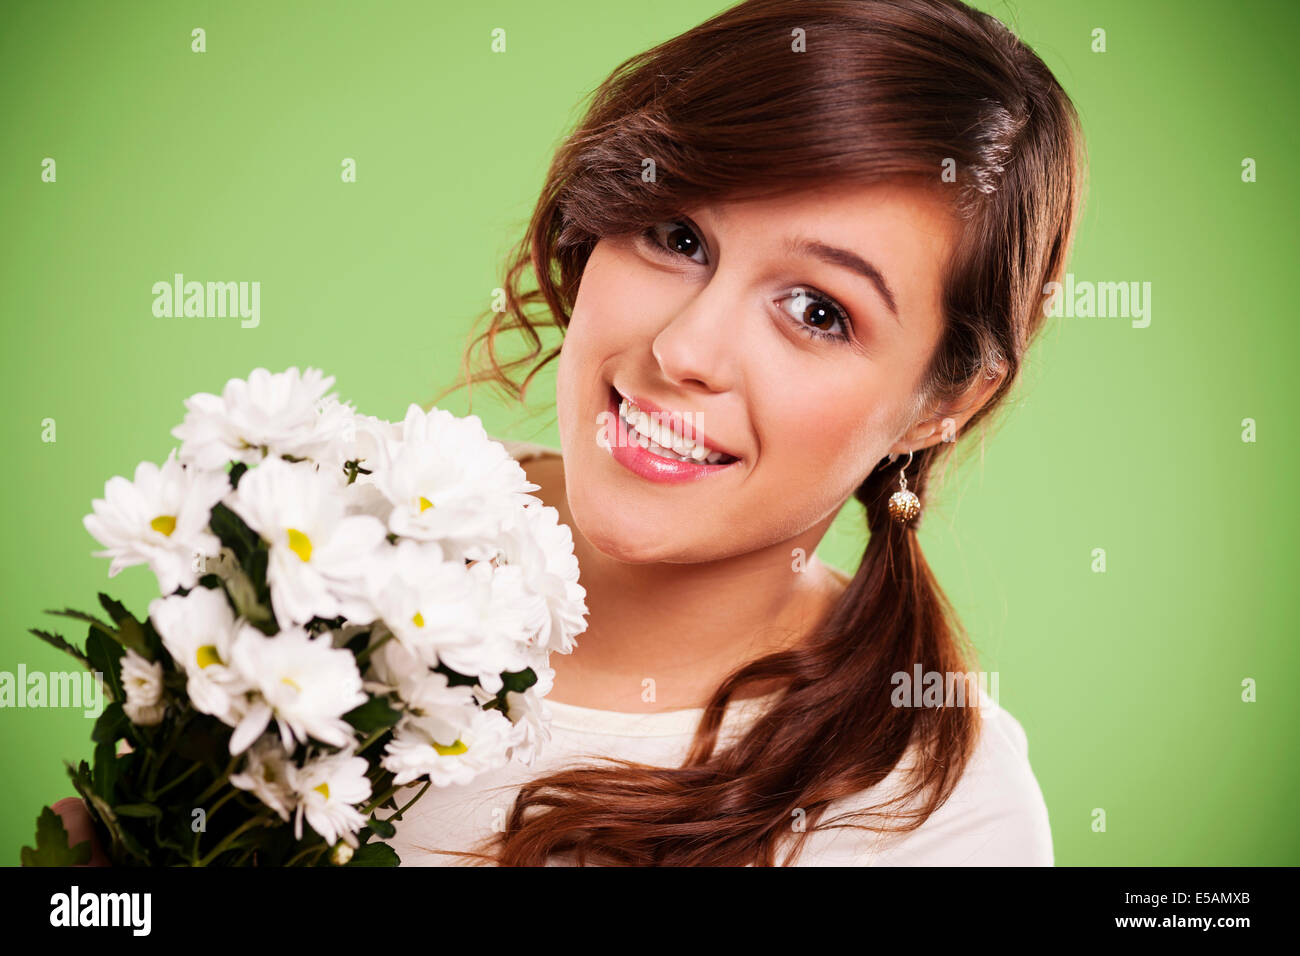 Attractive young woman with white daisies, Debica, Poland Stock Photo